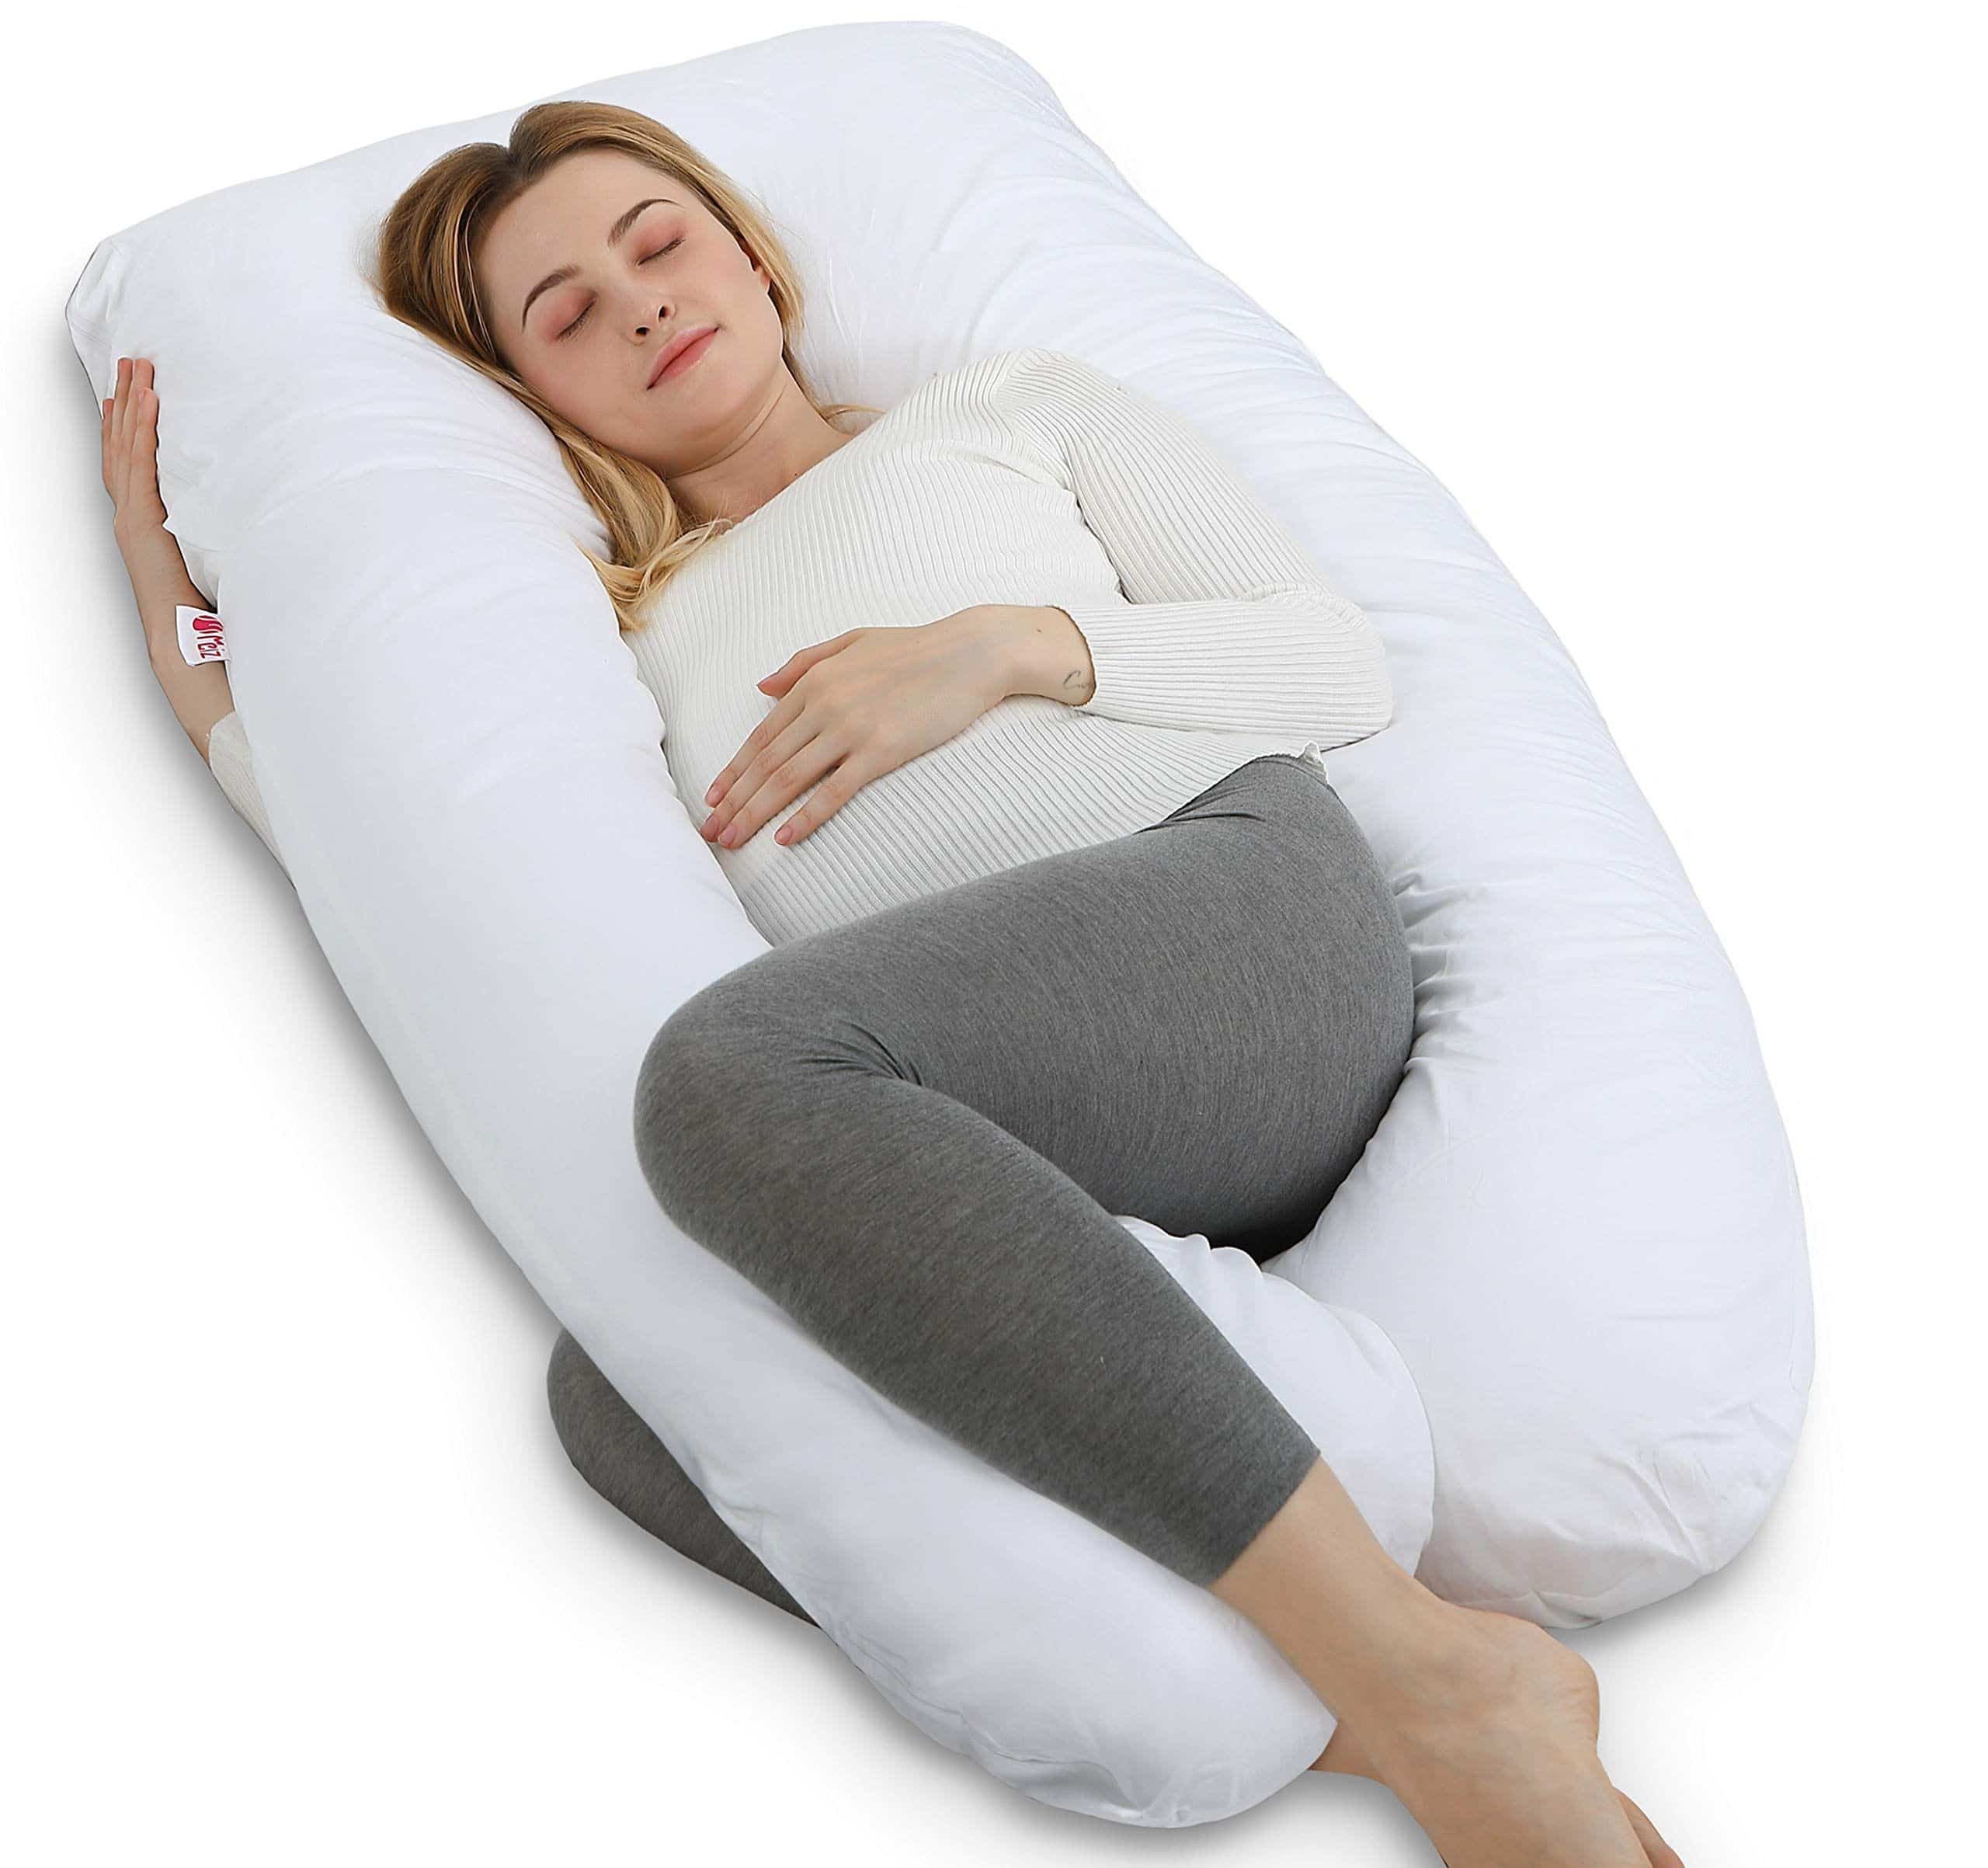 Meiz U Shaped Pregnancy Pillow - The 15 best pregnancy pillows for a comfortable sleeping position!